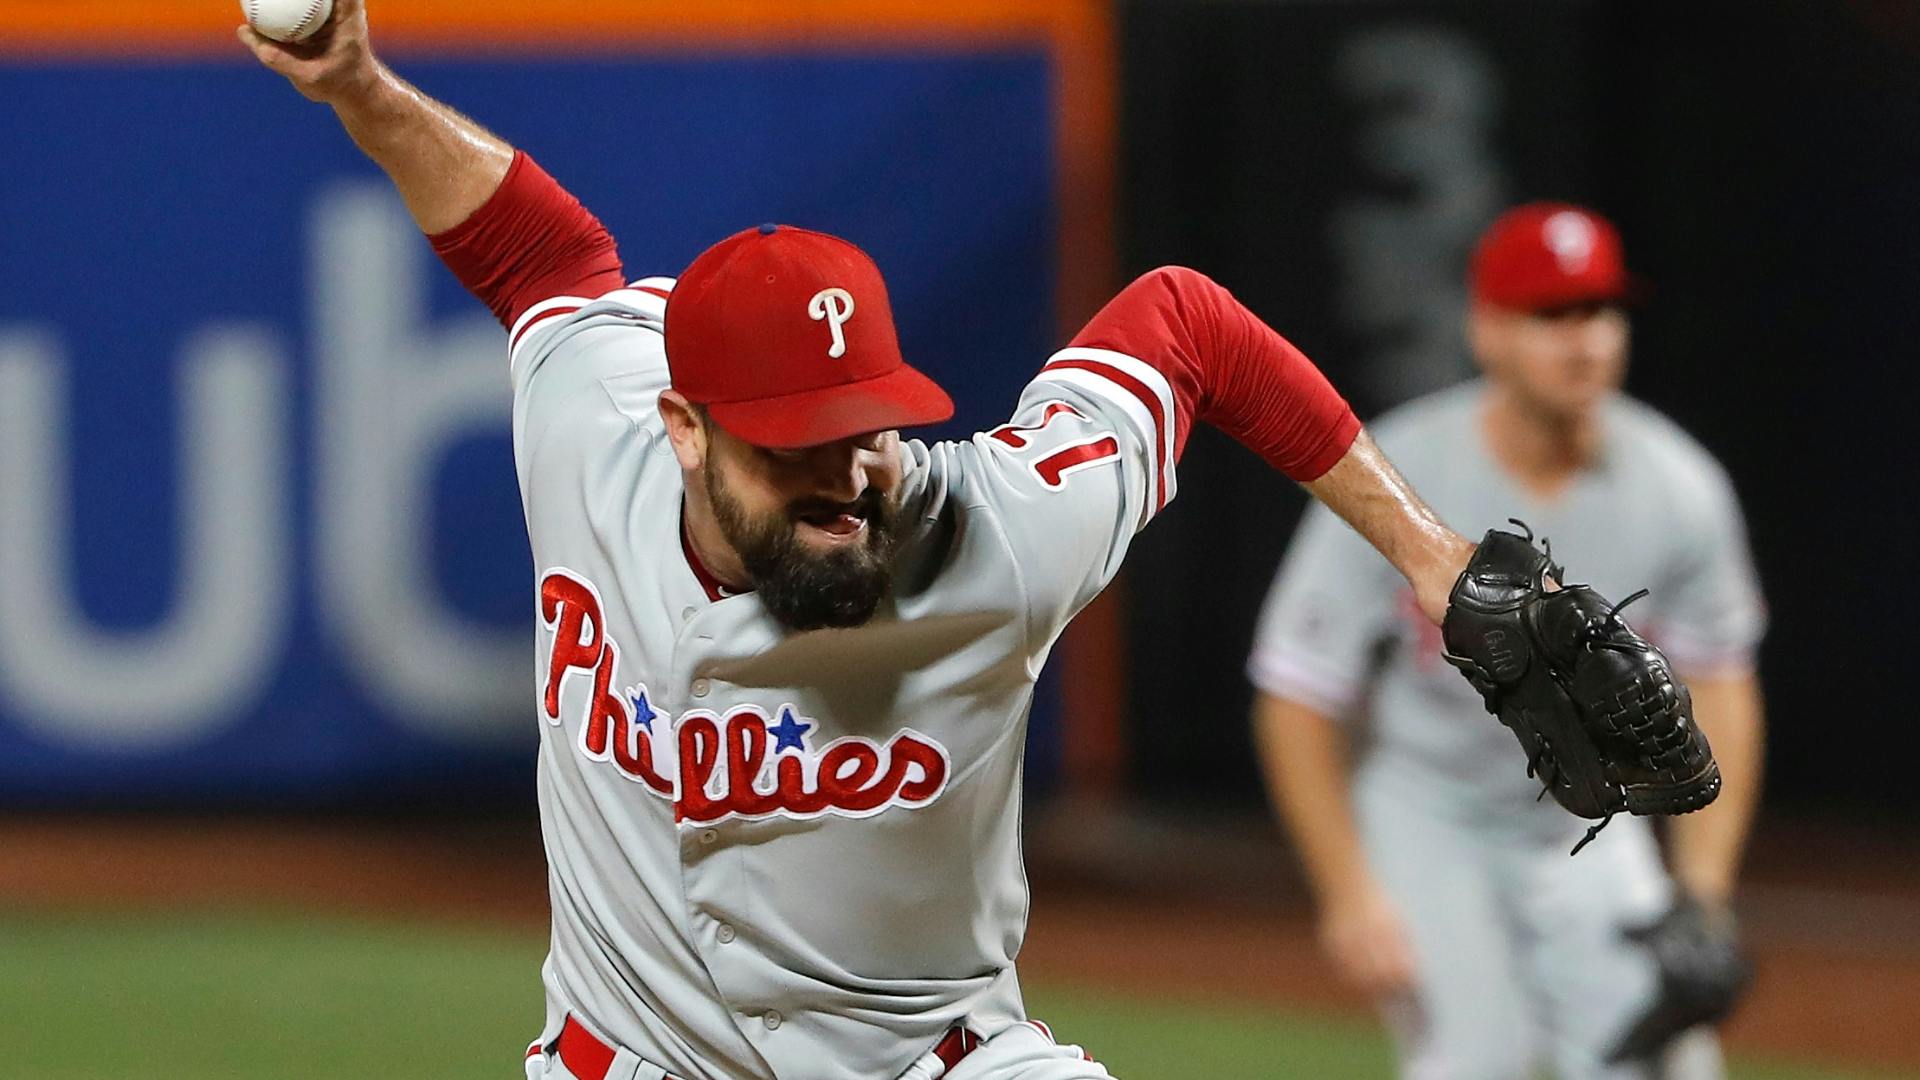 Phillies All-Star Pat Neshek of Brooklyn Park says the presence of him and Brad Hand at All-Star Game illustrates the quality of amateur baseball in Minnesota.